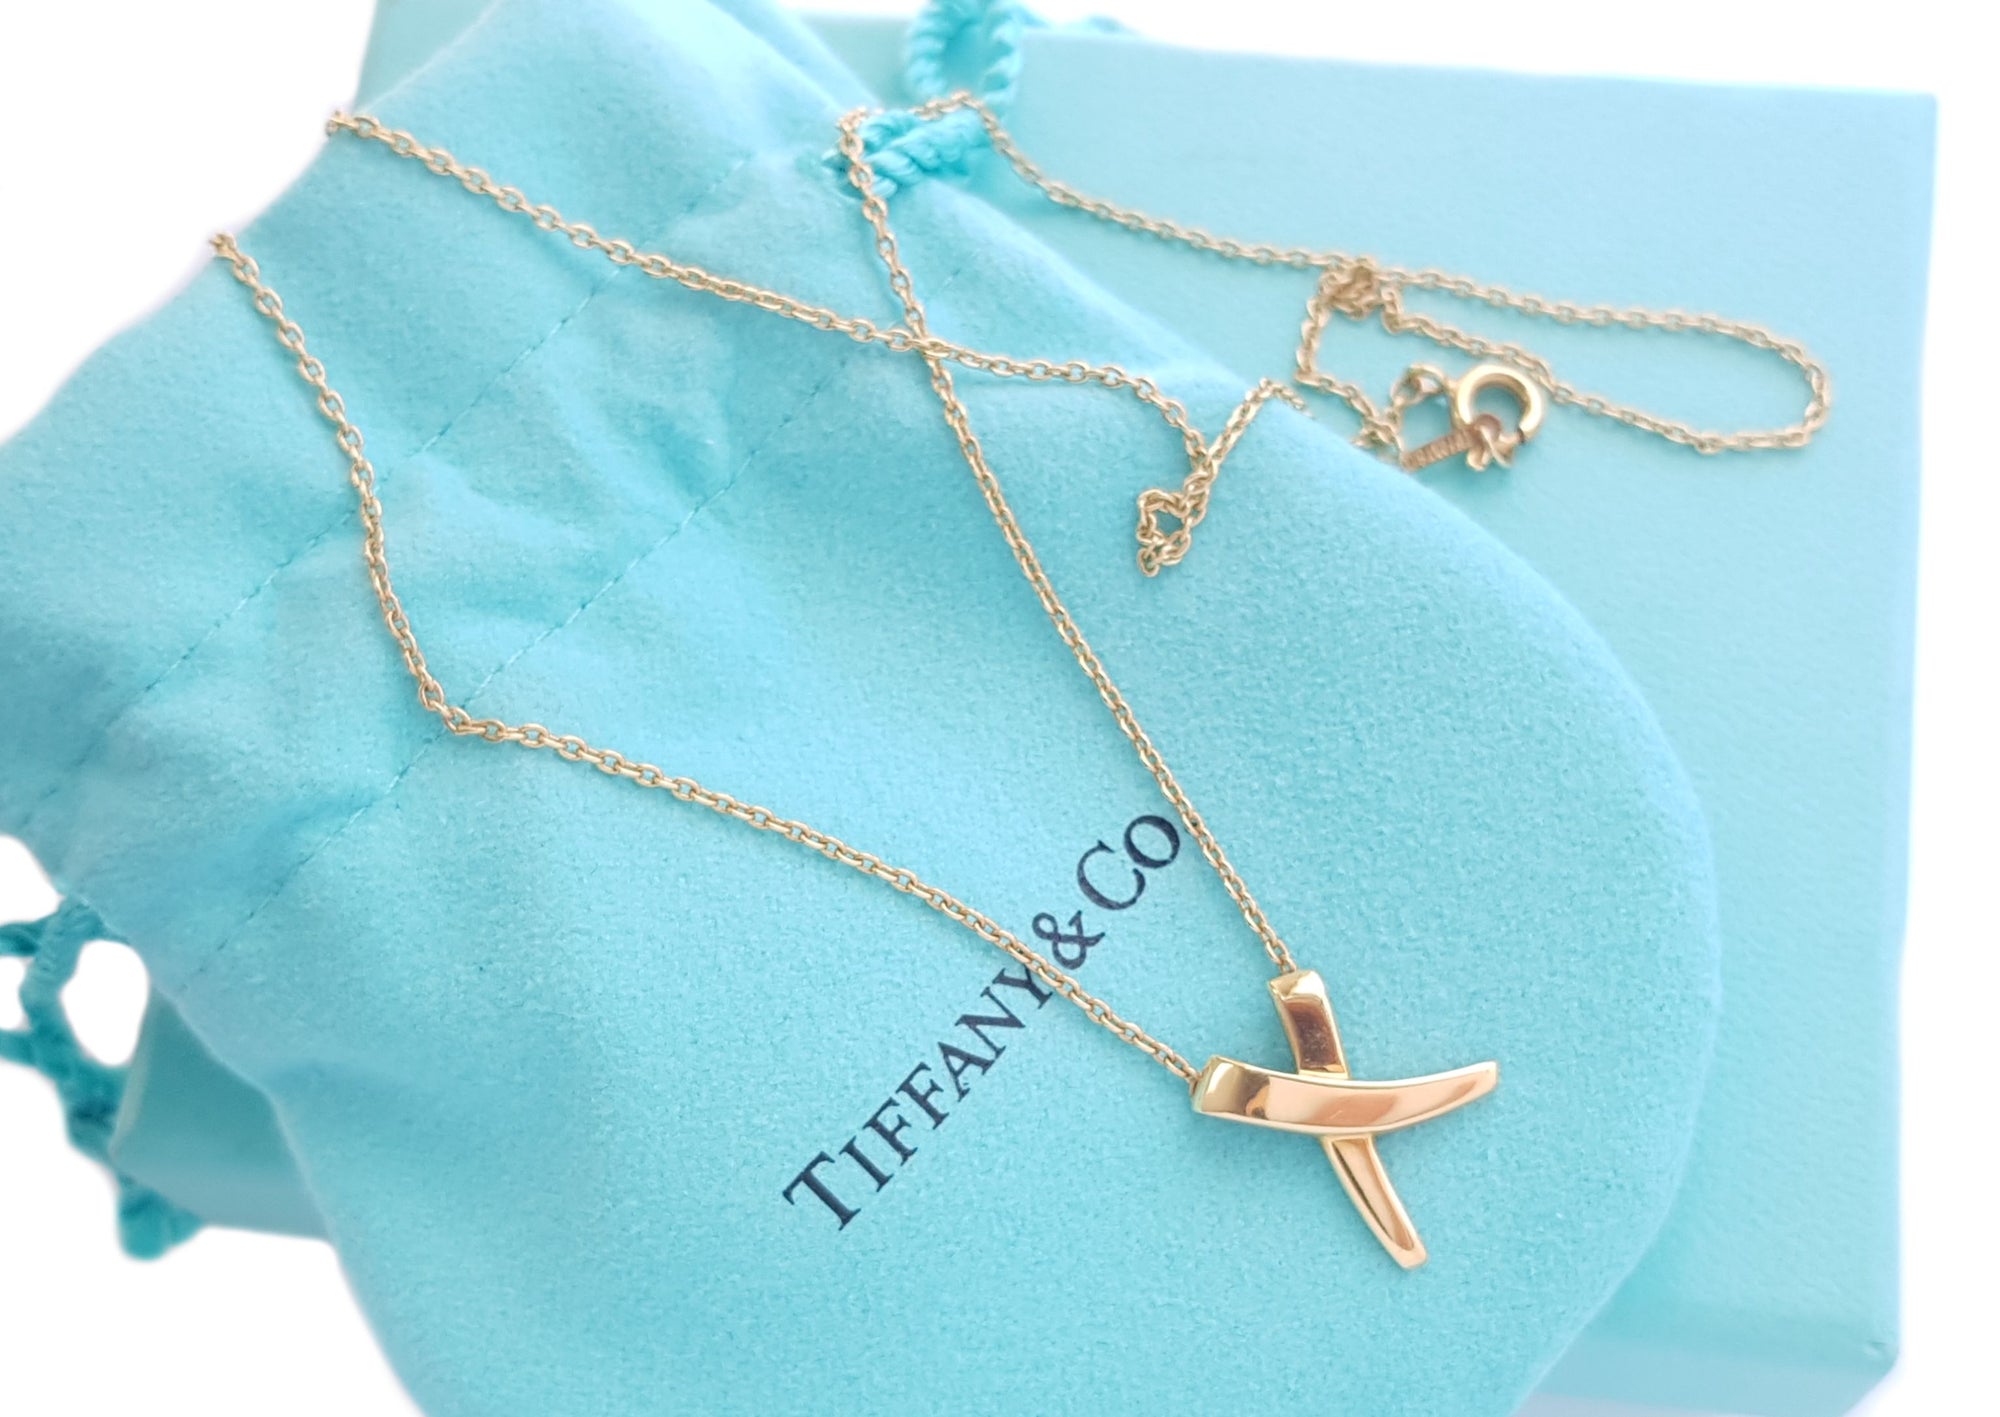 Tiffany & Co Classic “X” necklace {16”} | Necklace, Womens jewelry necklace,  Tiffany & co.